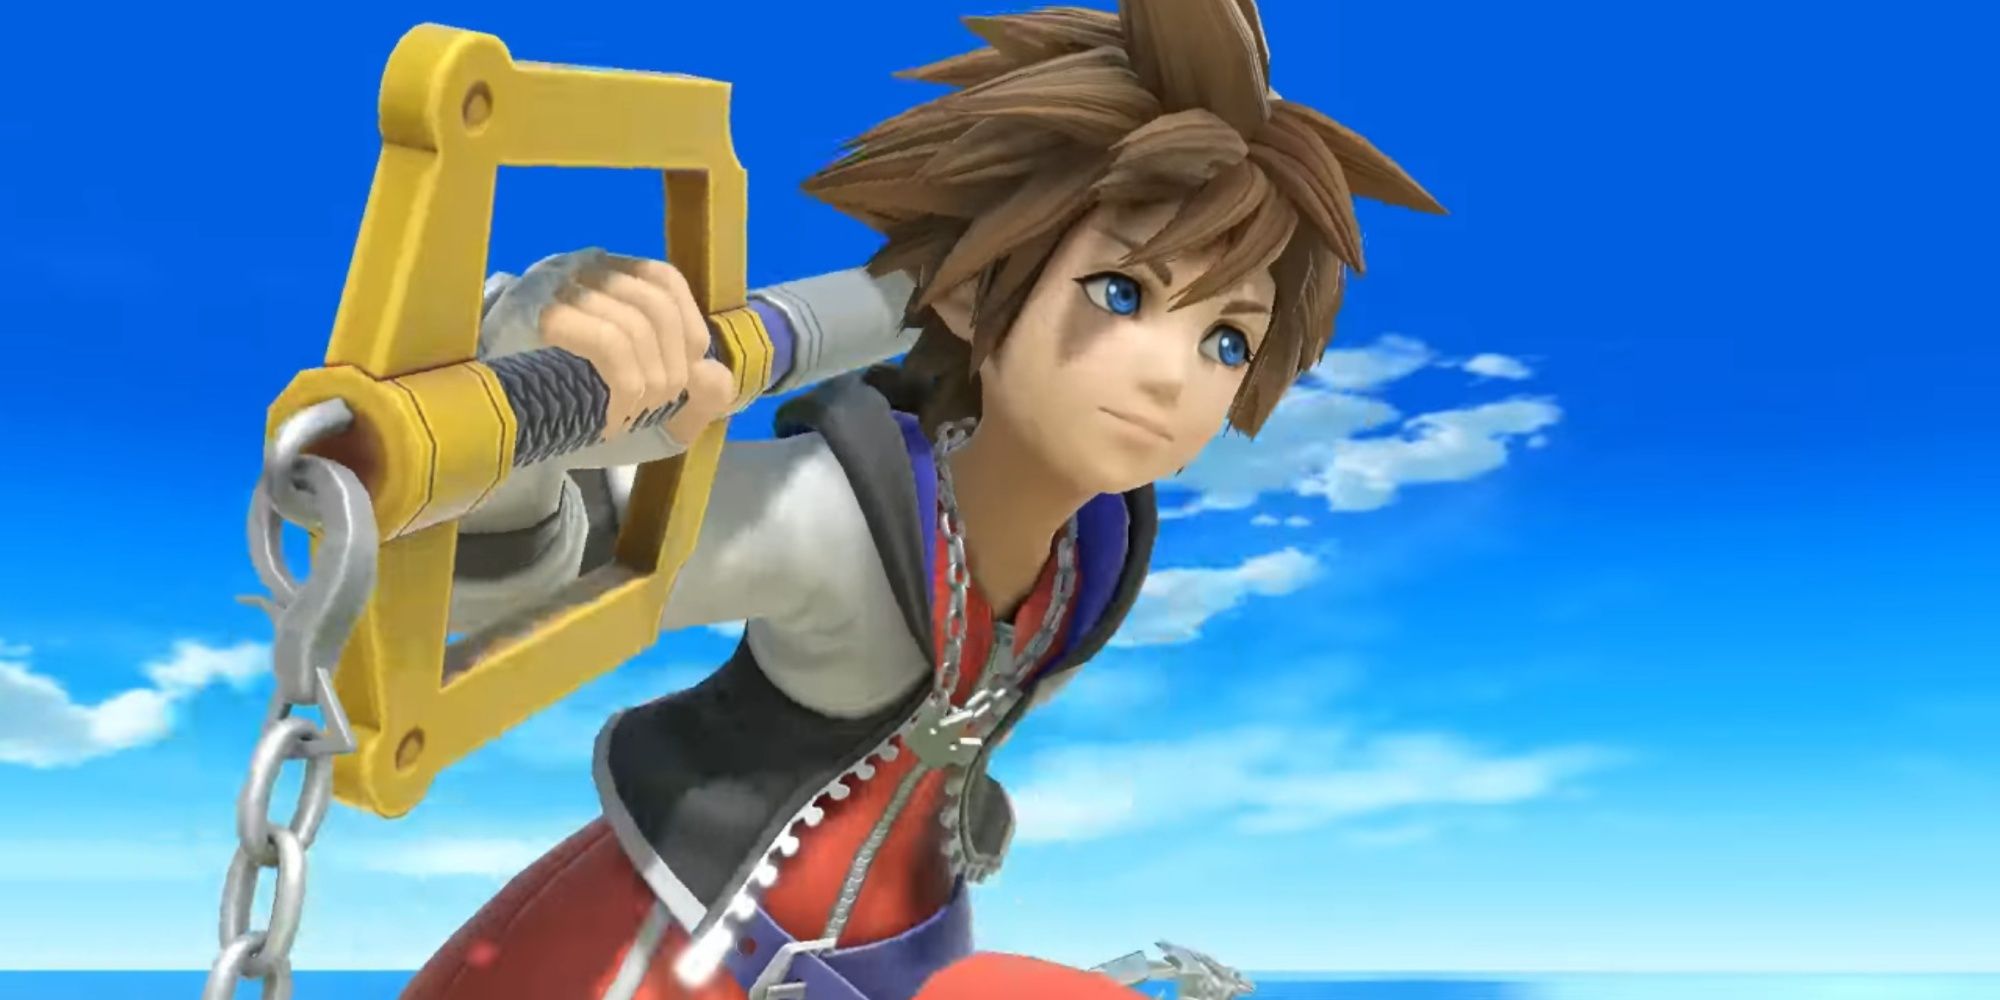 sora with his keyblade in smash ultimate